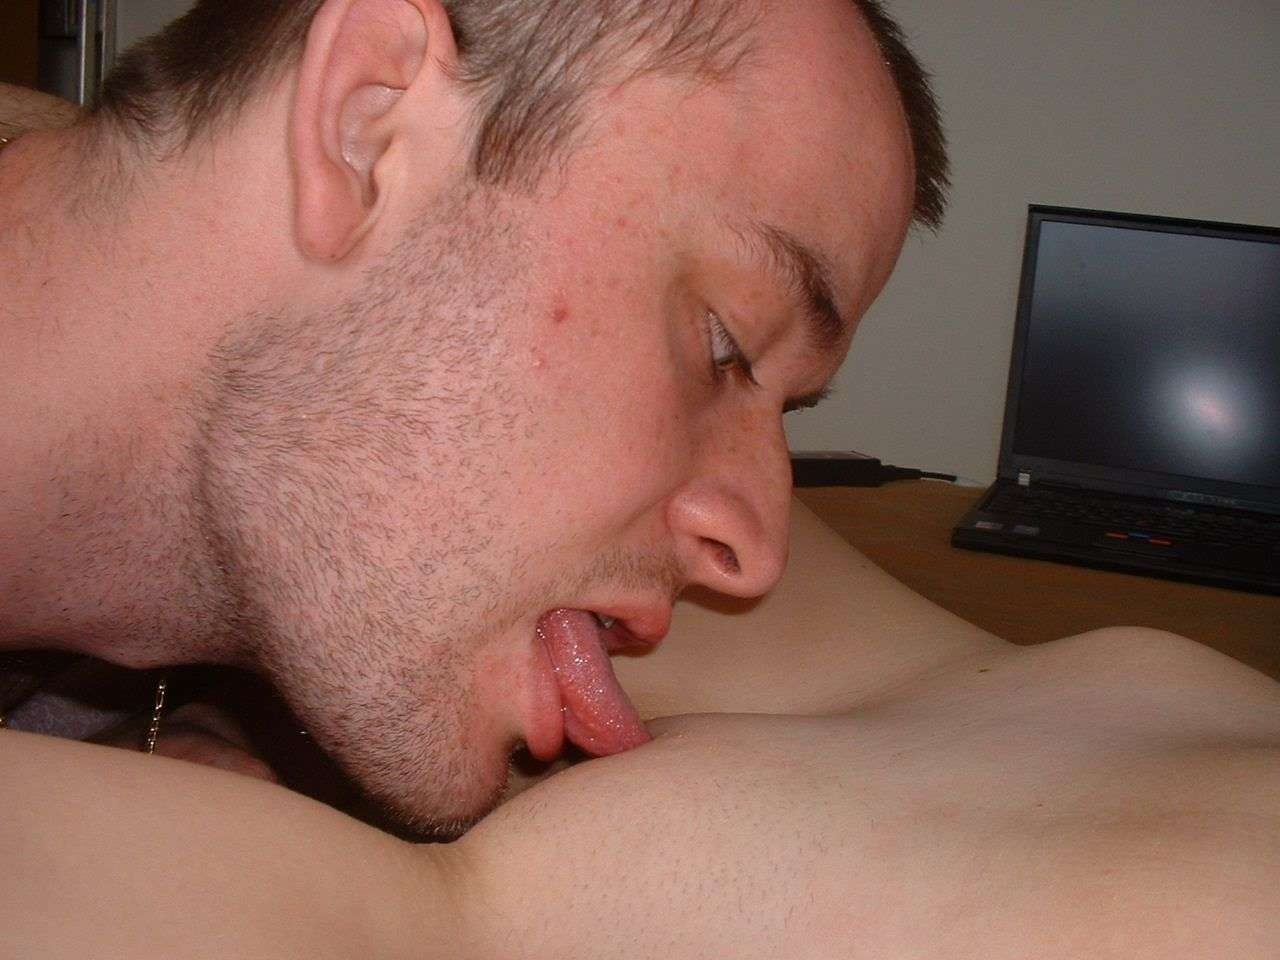 Dude and his girlfriend having oral sex #73115818